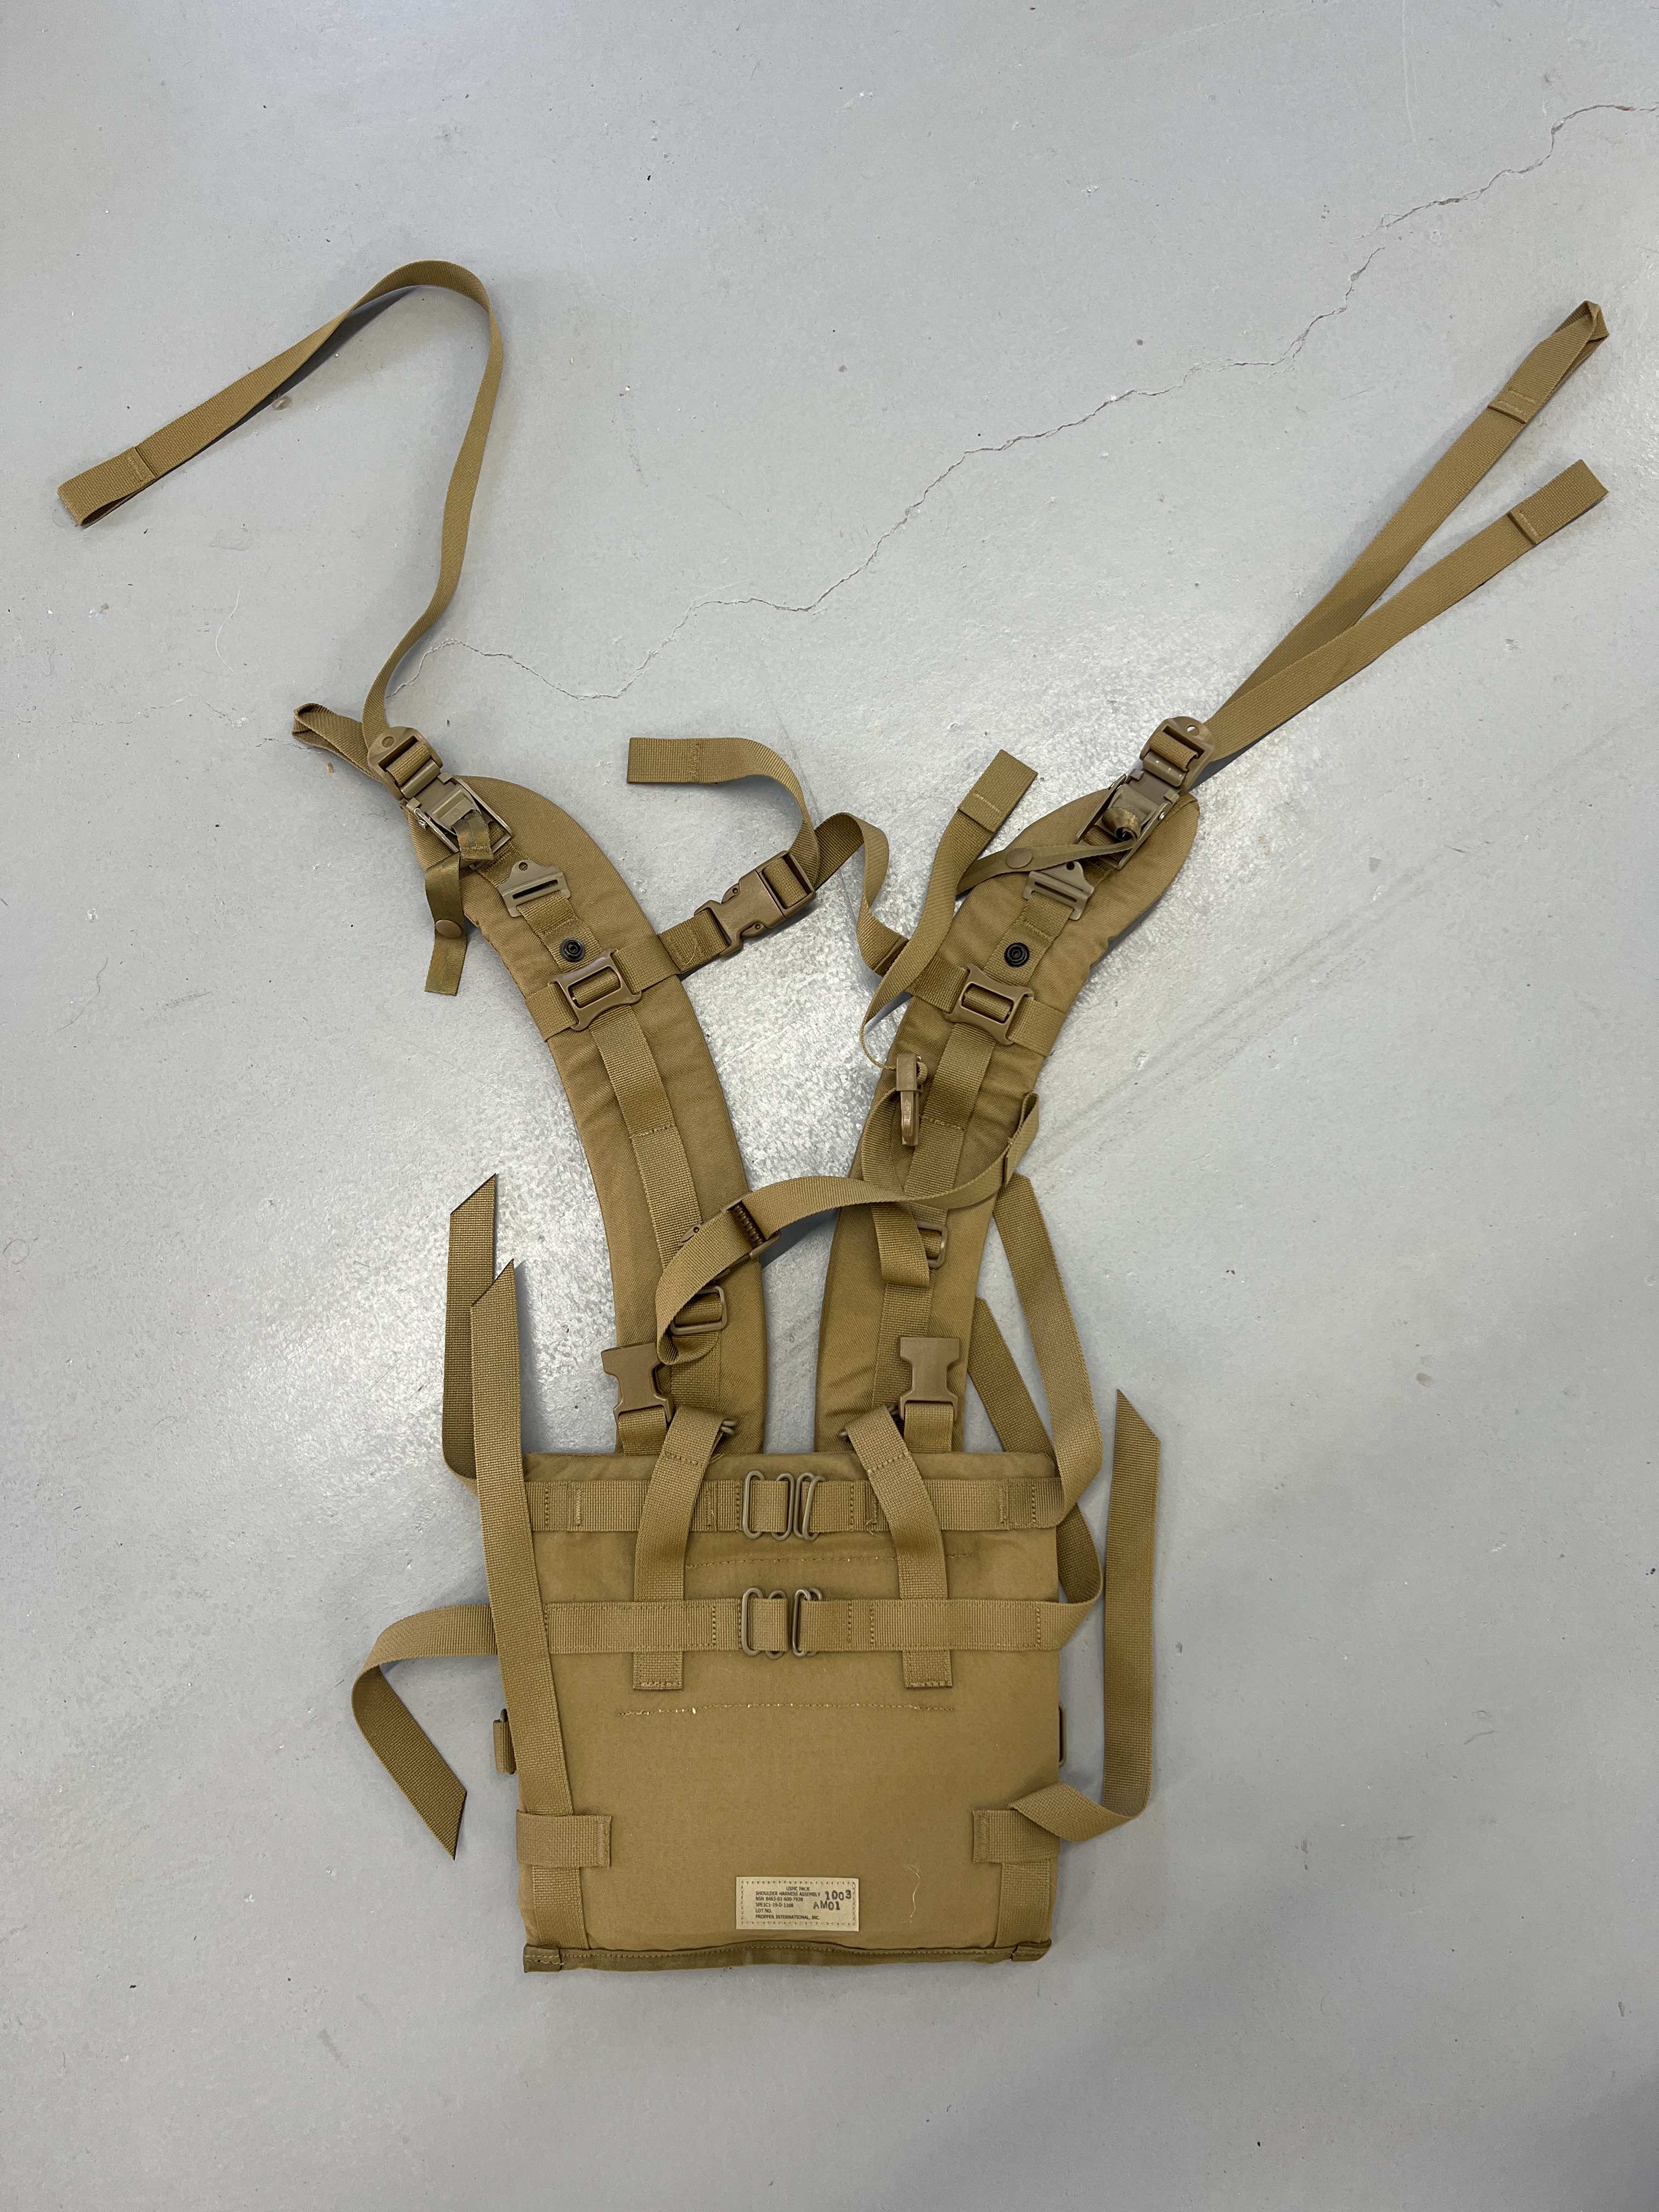 New USMC Pack Filbe Shoulder Harness Strap Assembly Coyote 8465-01-600-7938